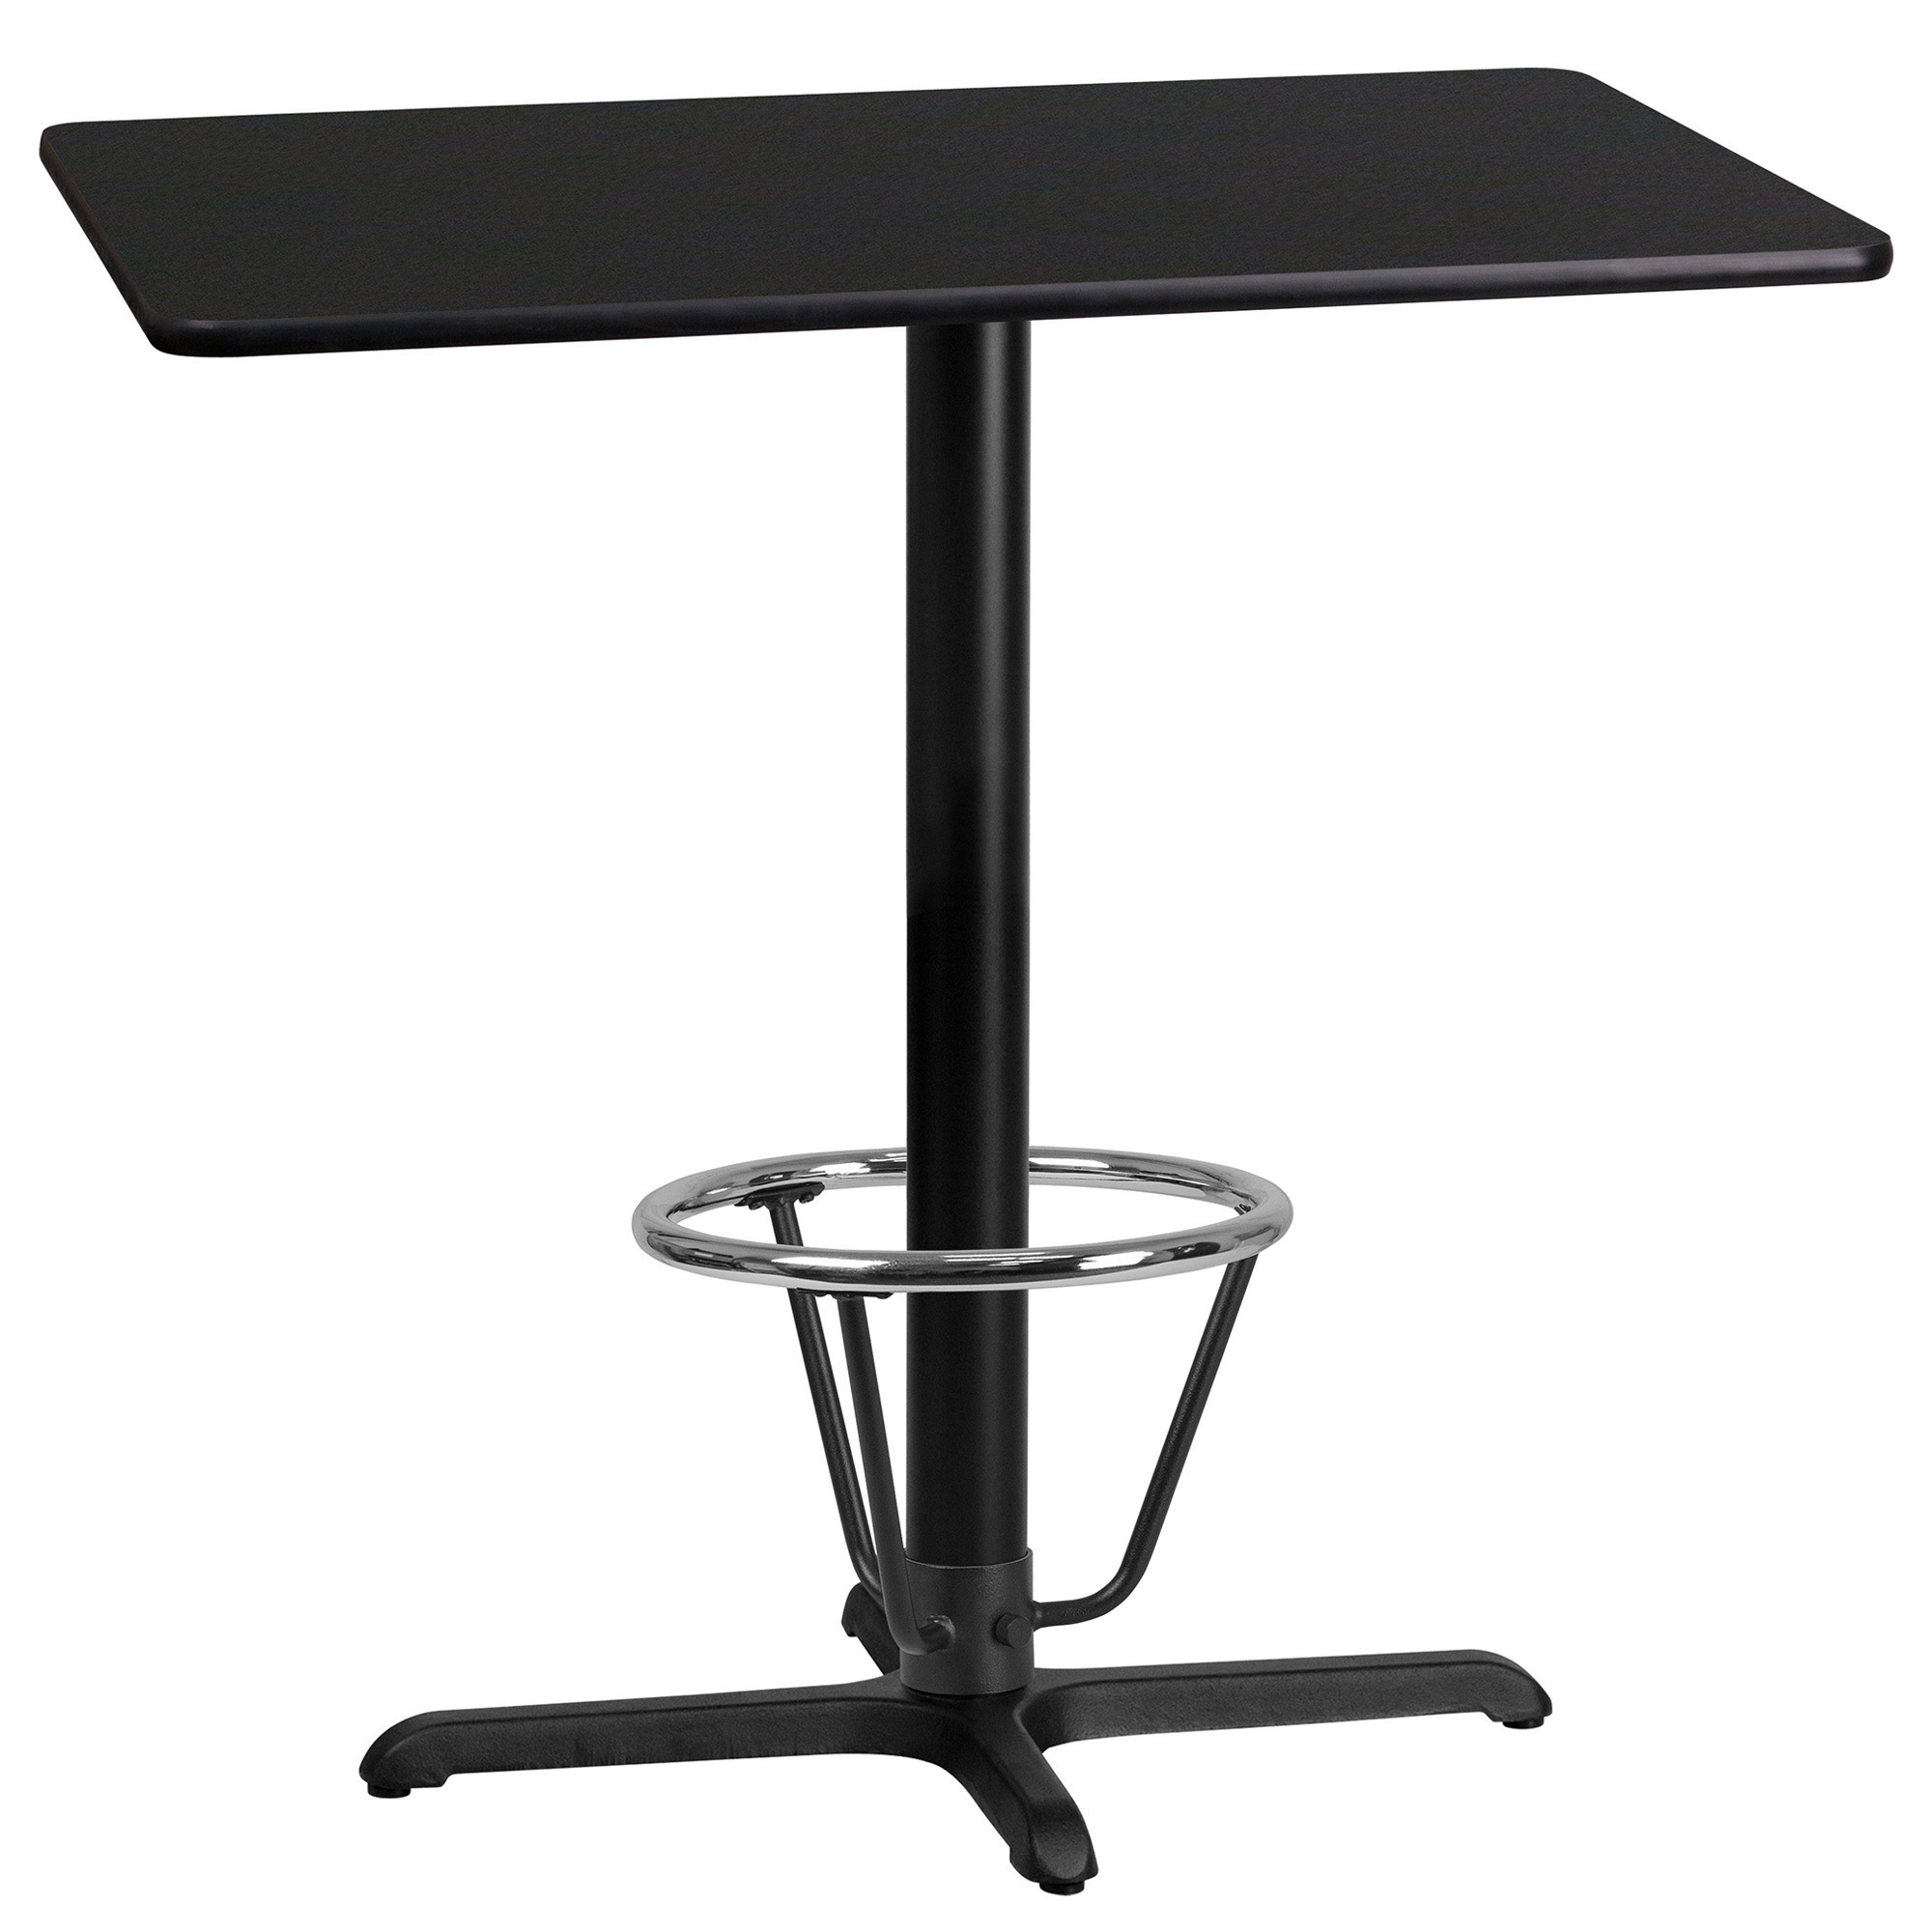 Flash Furniture 42Inch L x 24Inch W Bar Height Metal Table with X-Base â Black/Mahogany Reversible Laminate Top, Model XUBK2442T230B3F